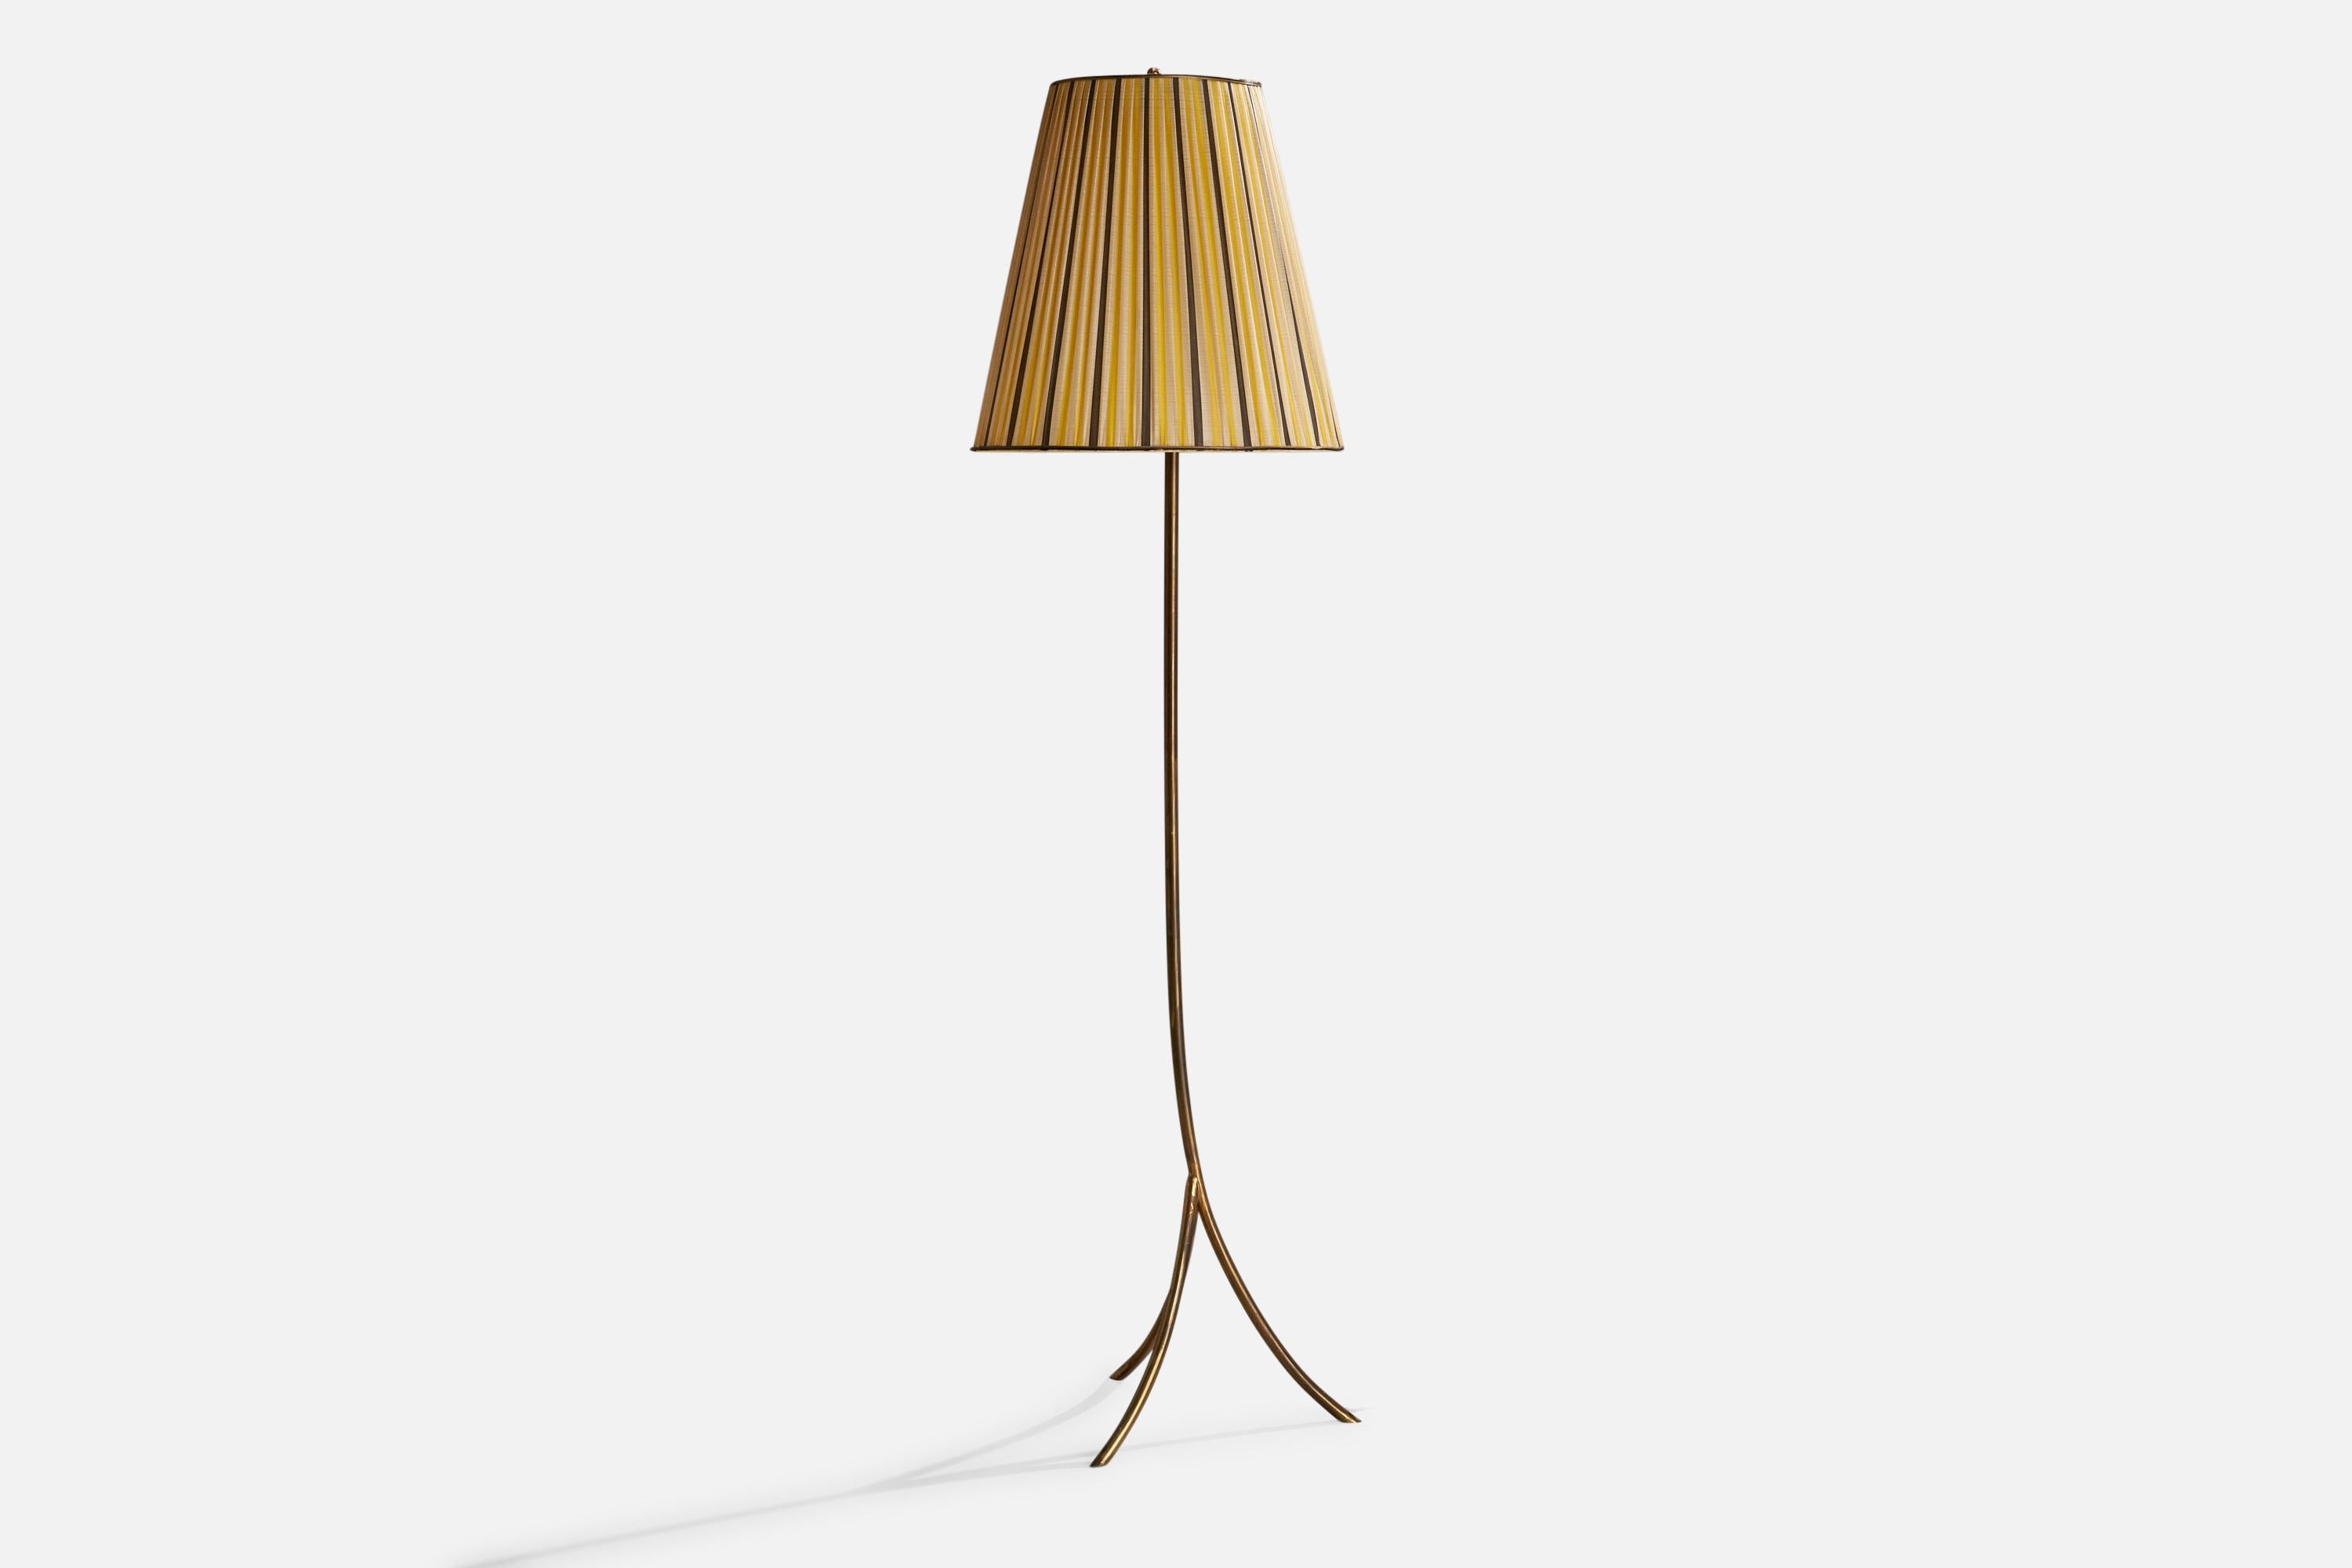 A brass and yellow green fabric floor lamp designed and produced in Austria, c. 1950s.

Overall Dimensions (inches): 74” H x 19.75” W x 19” D
Stated dimensions include shade.
Bulb Specifications: E-14 Bulb
Number of Sockets: 1
All lighting will be